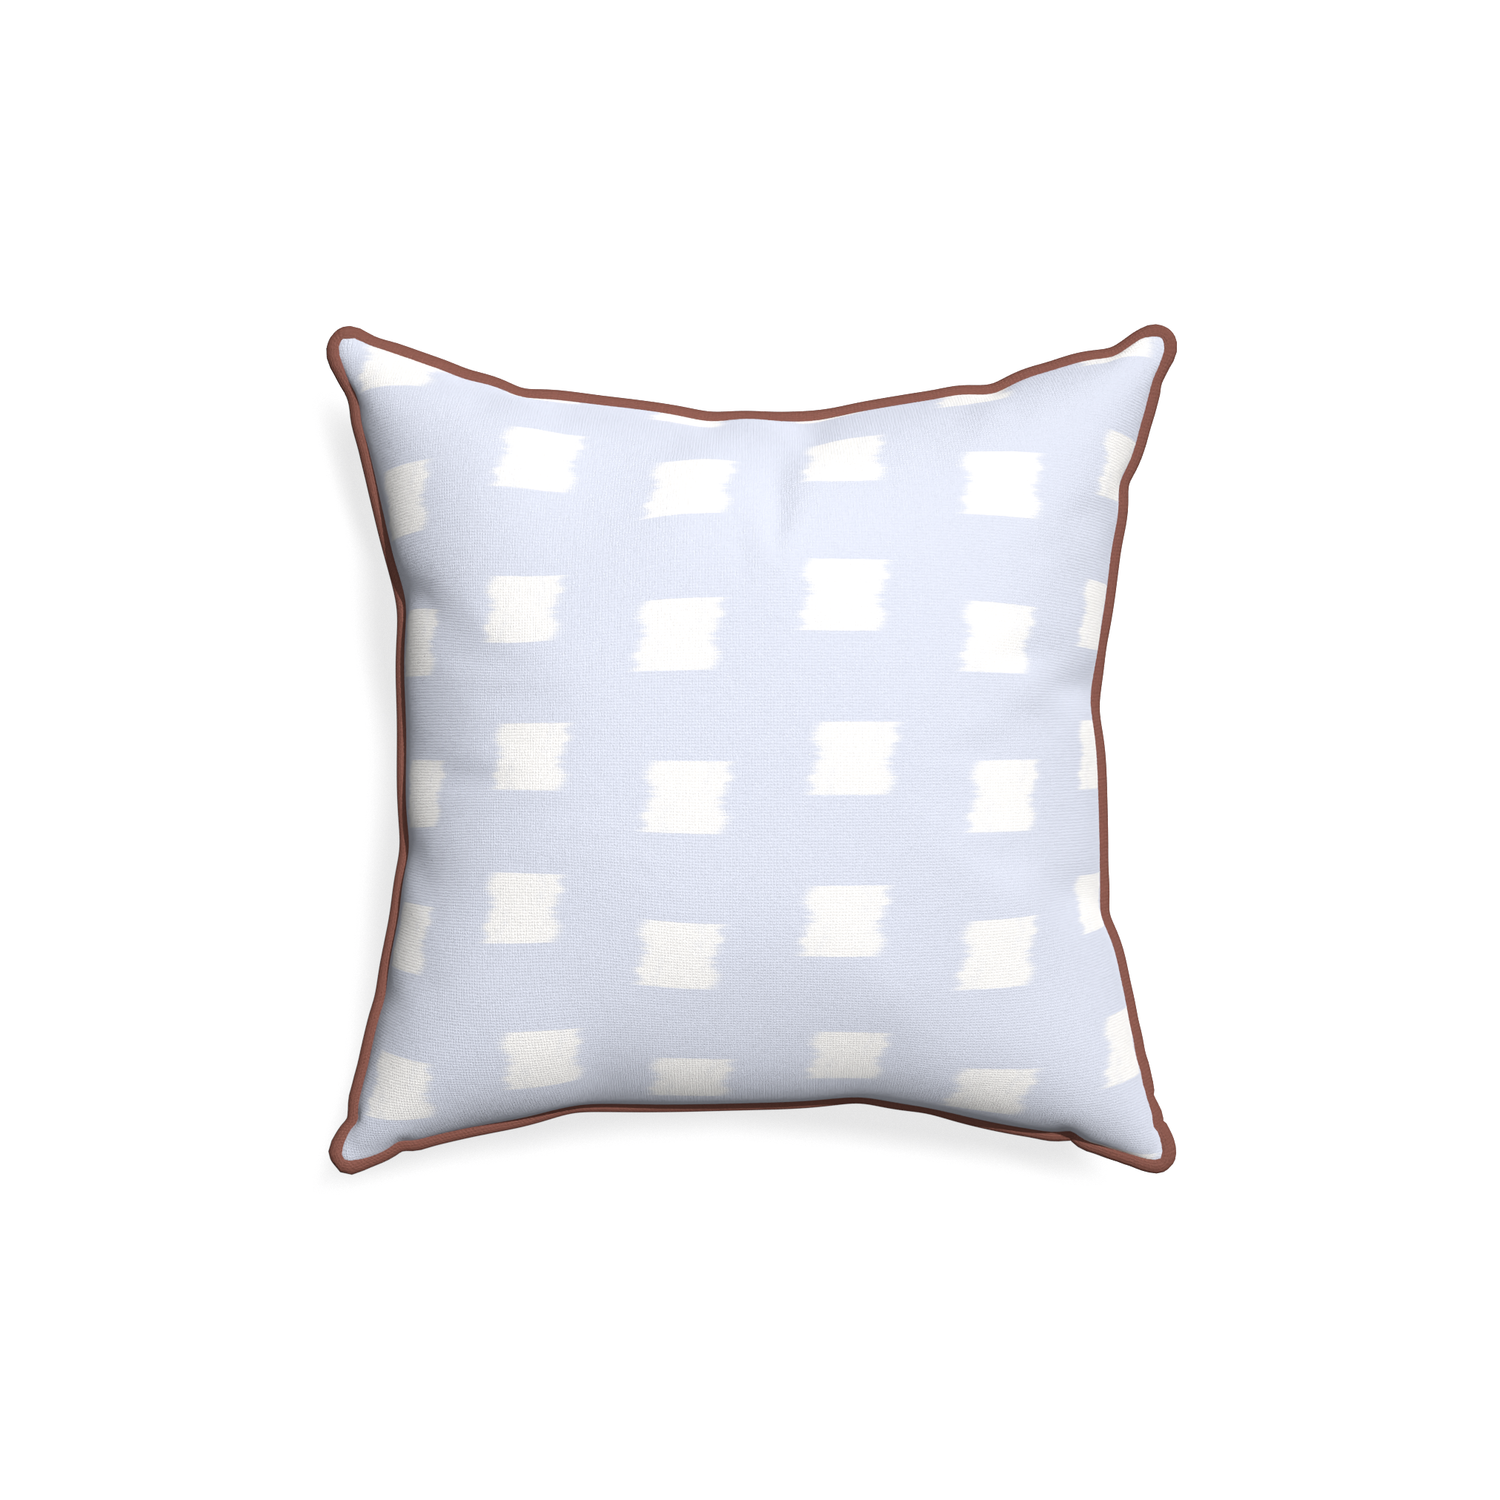 18-square denton custom sky blue patternpillow with w piping on white background